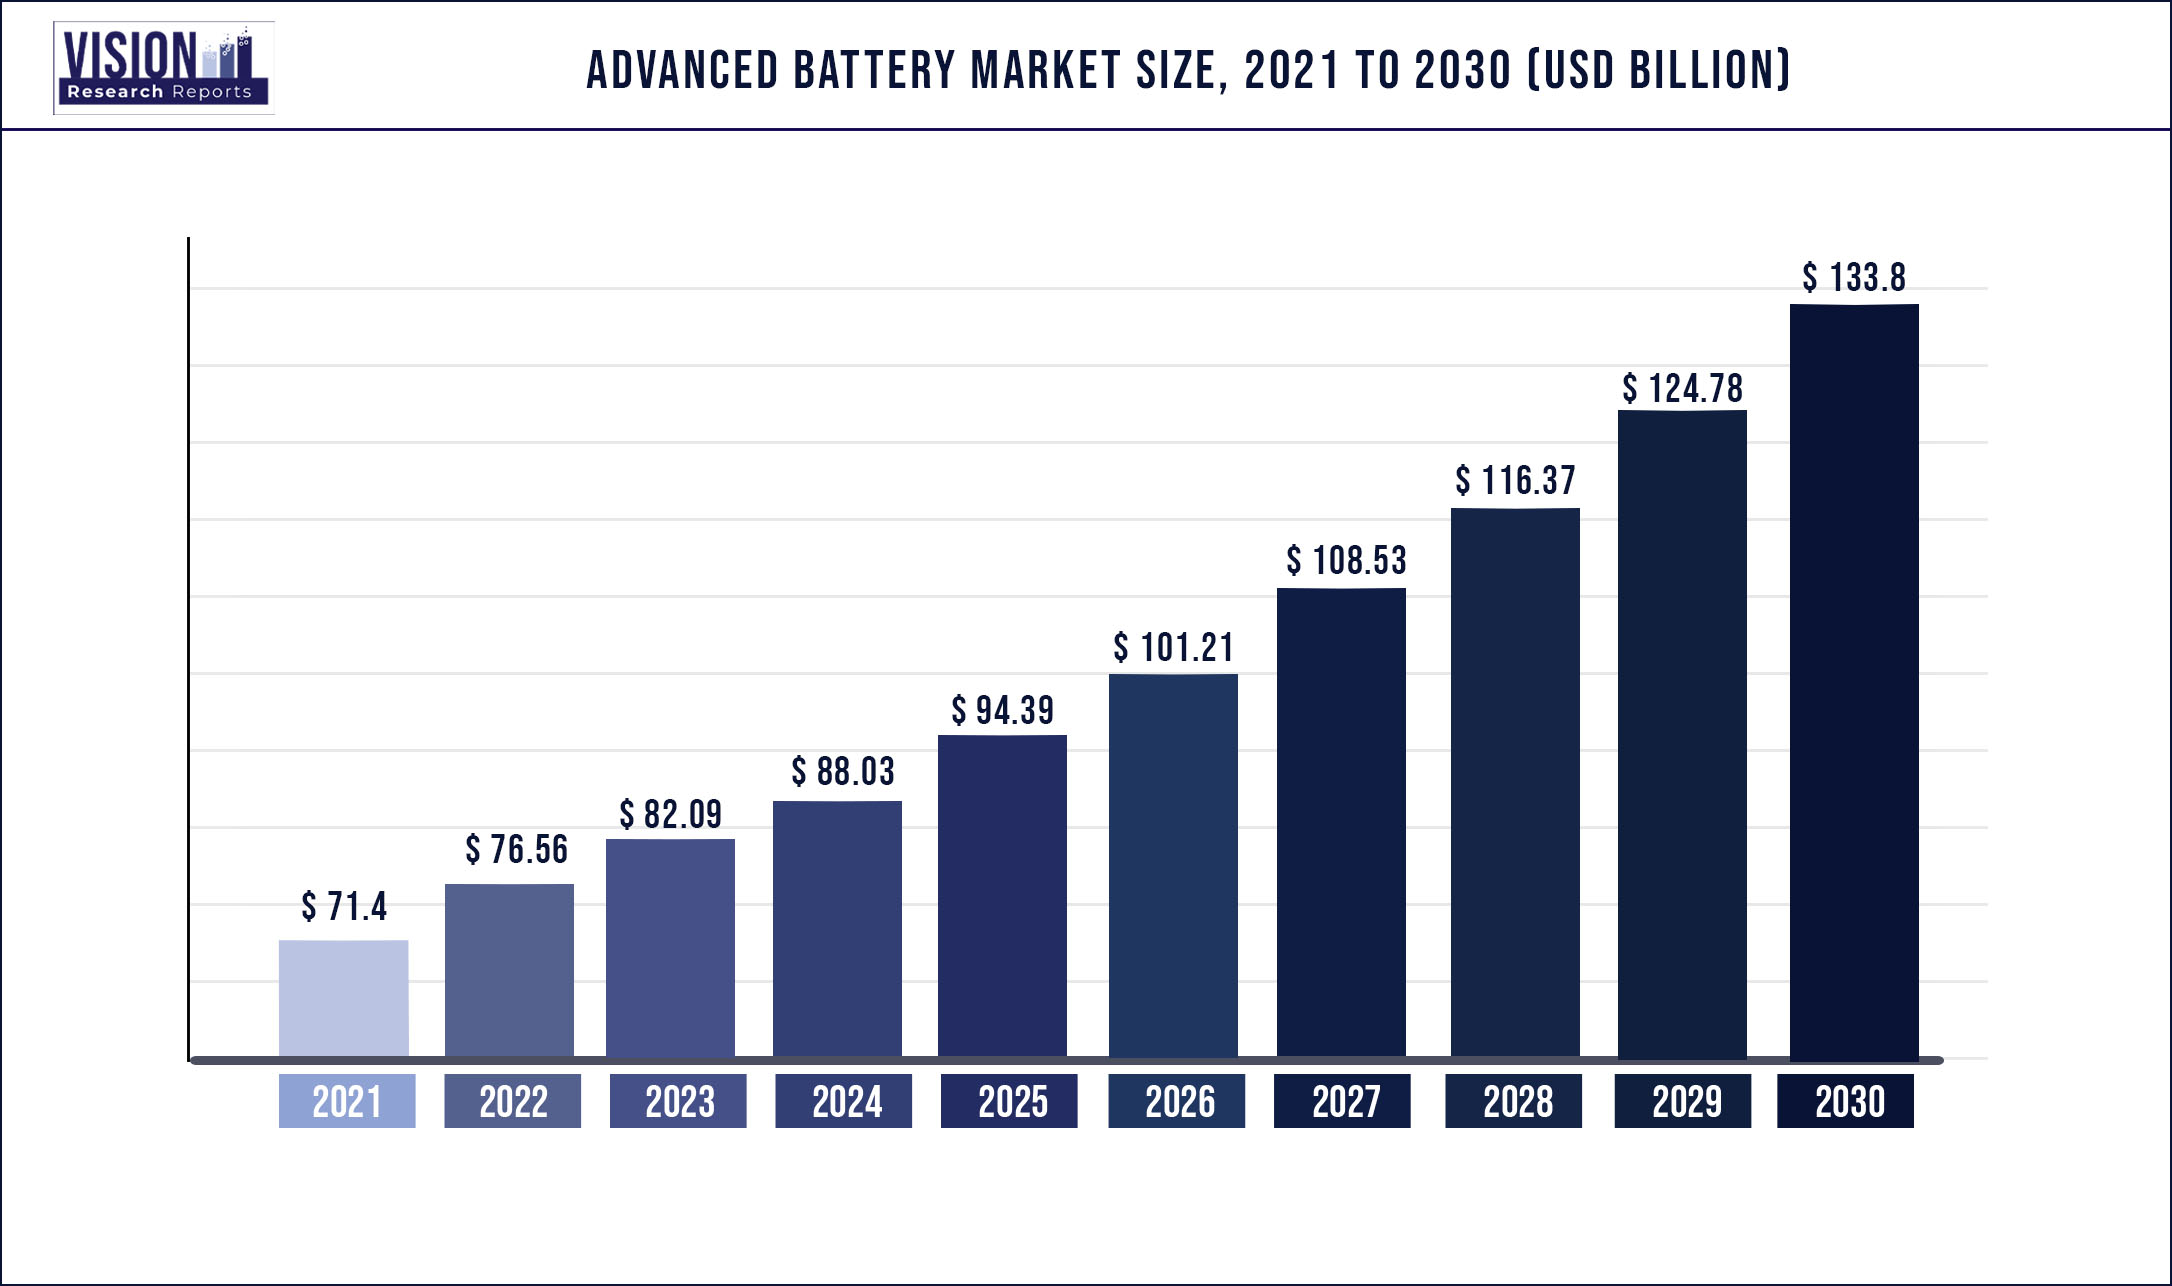 Advanced Battery Market Size 2021 to 2030